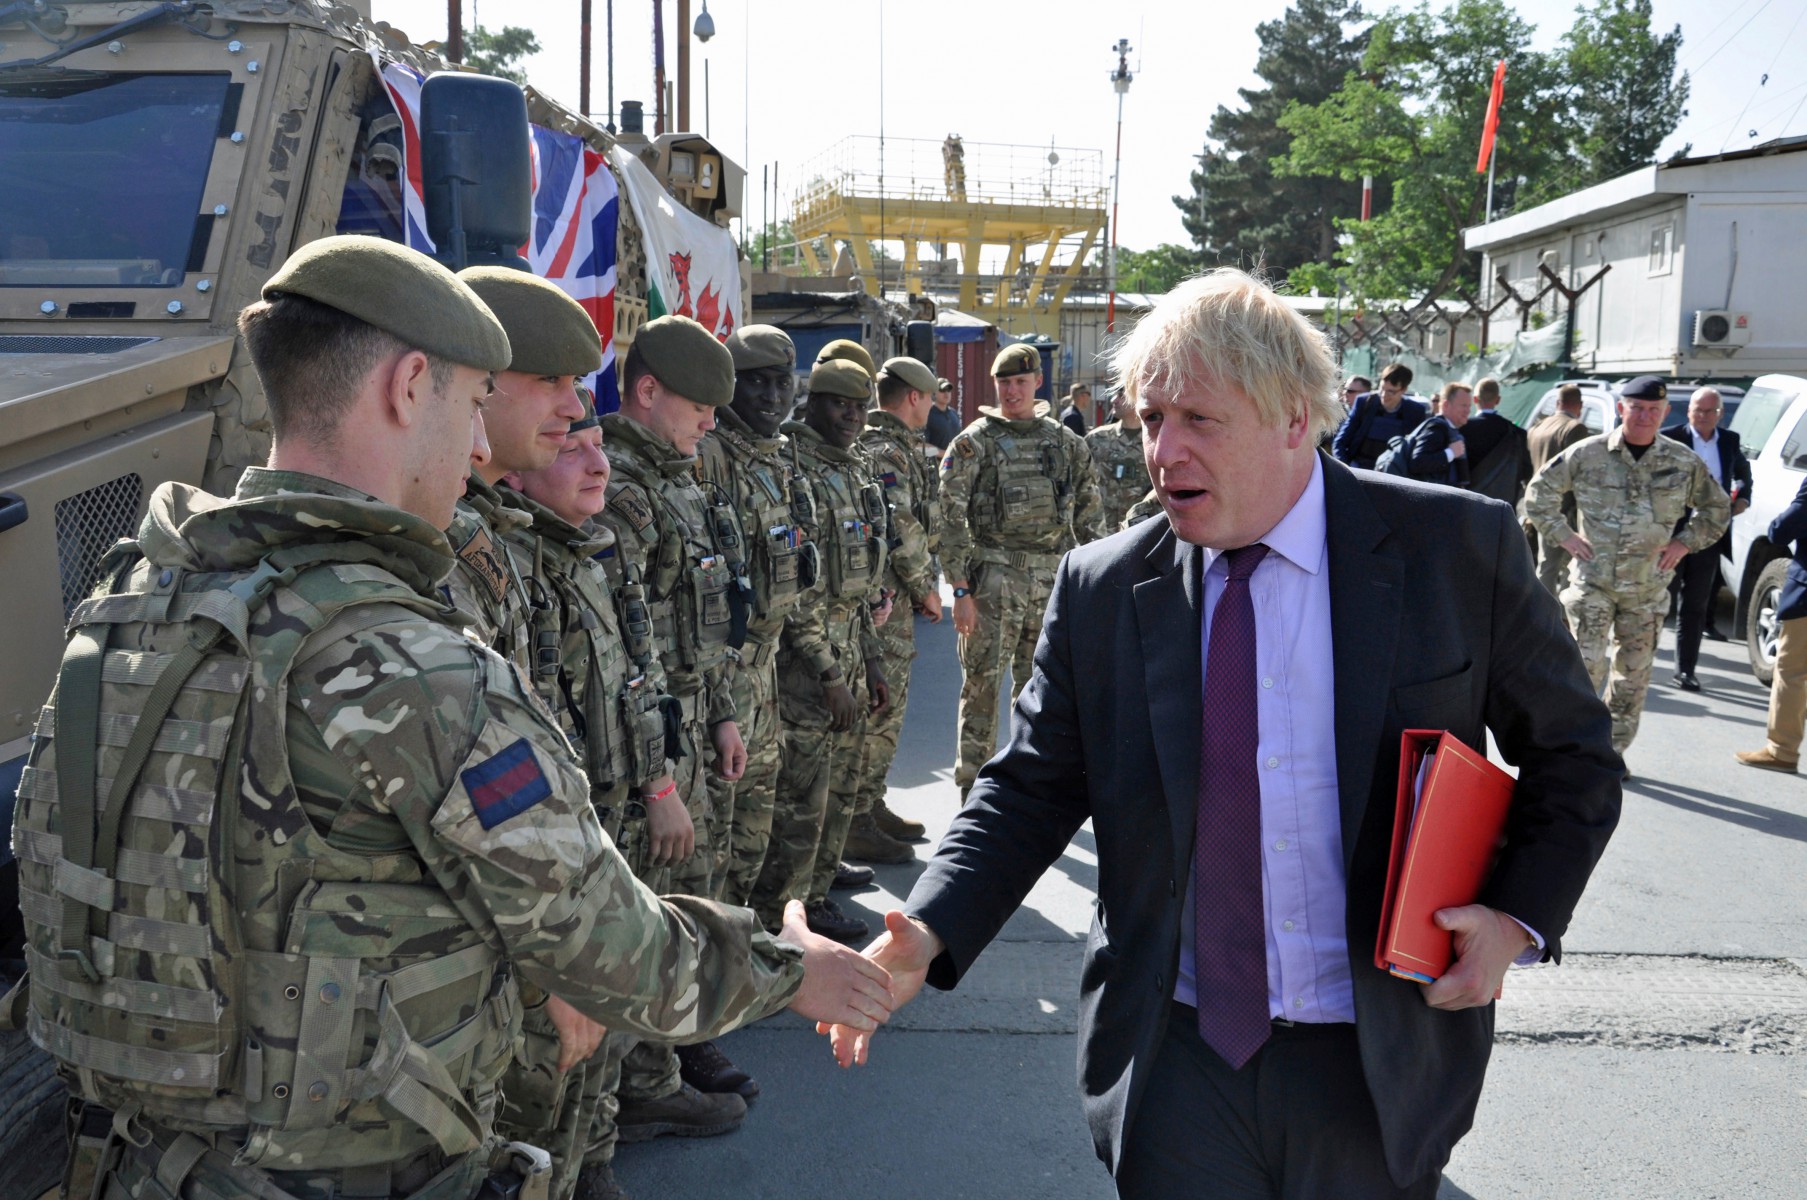 Mr Johnson met with British soldiers in Afghanistan in June 2018 while acting as Secretary of State for Foreign Affairs